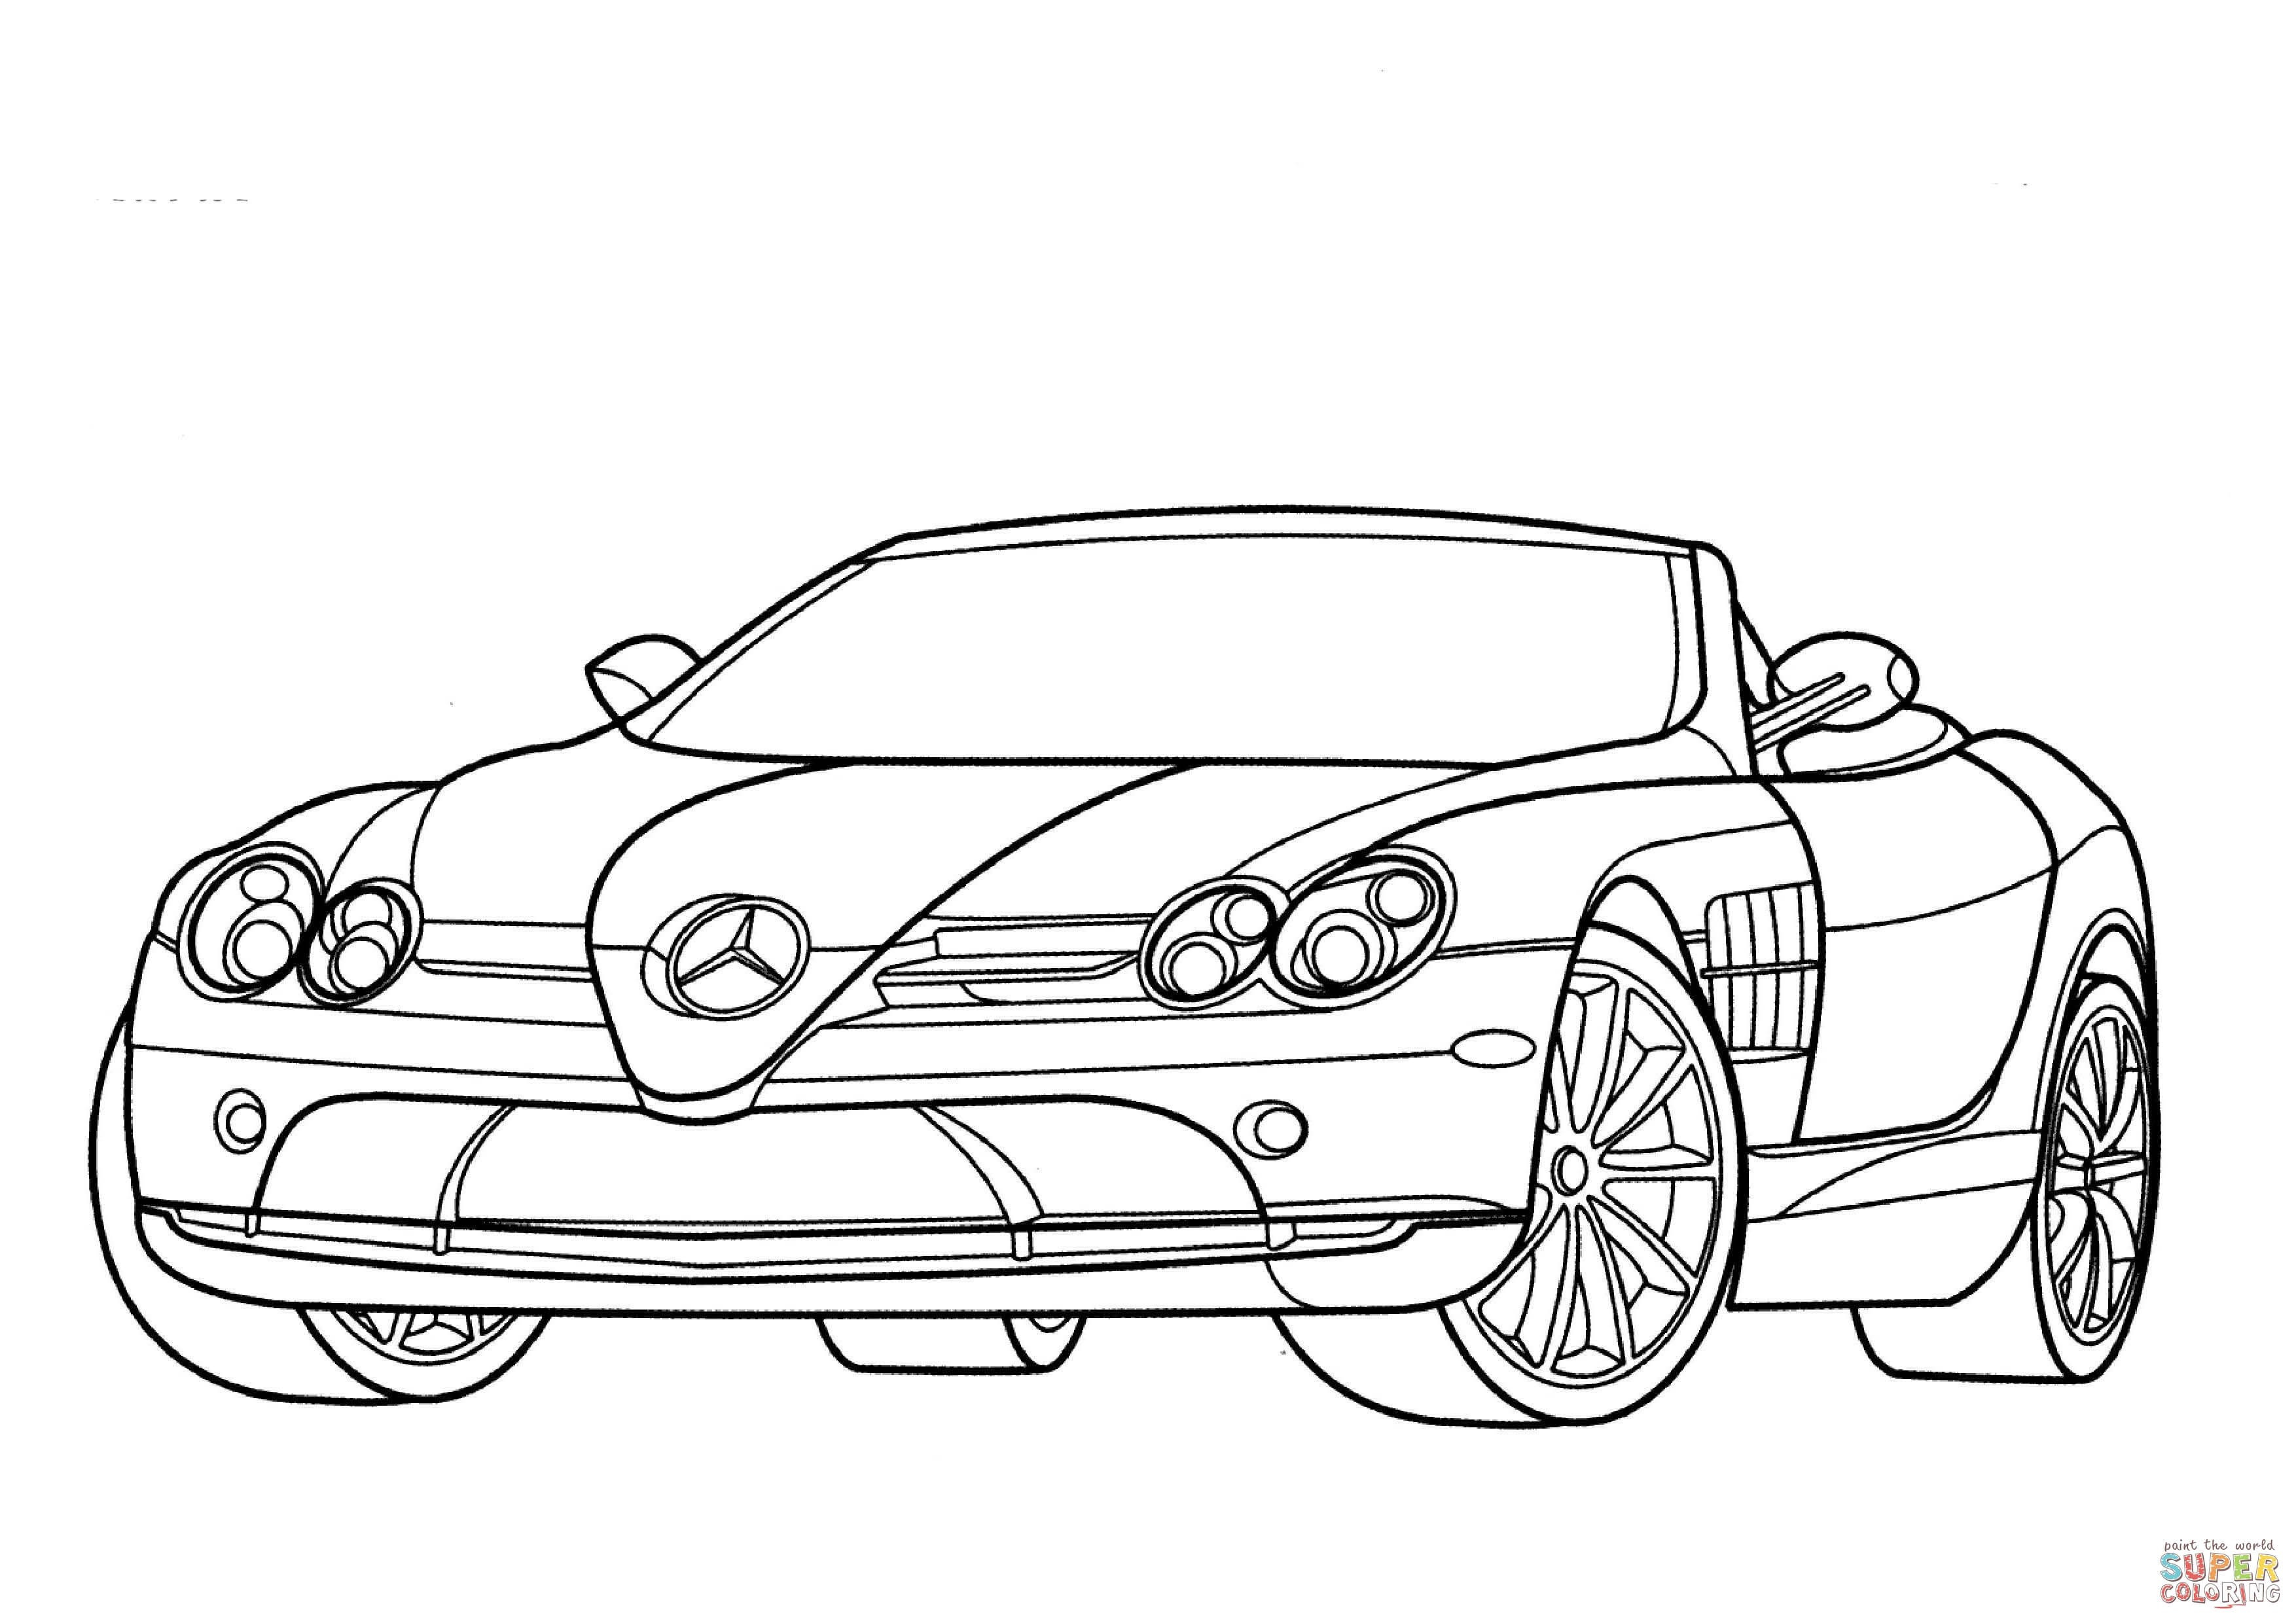 Nissan Gtr Coloring Pages at GetDrawings  Free download